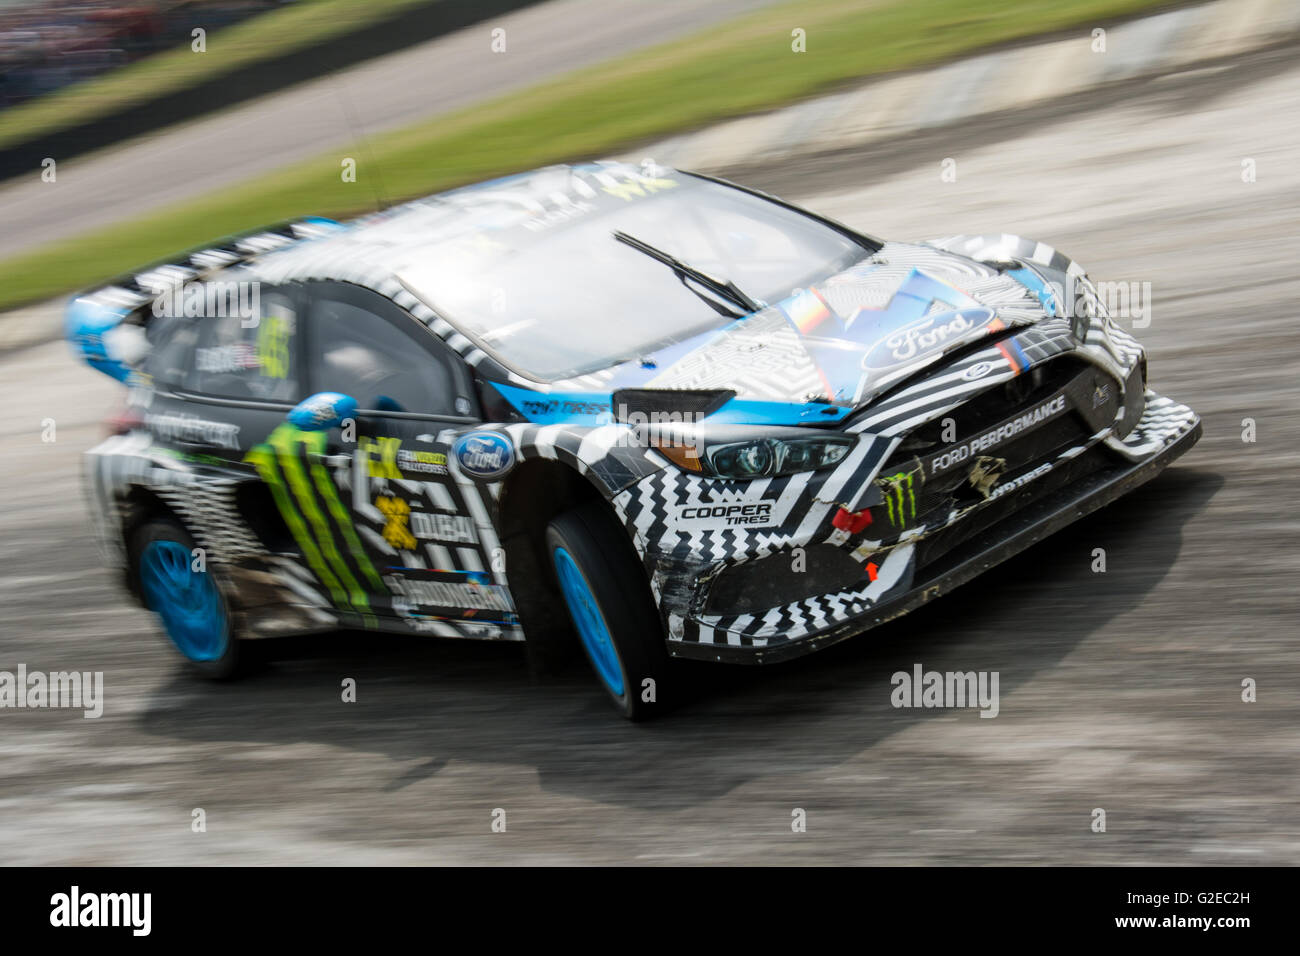 Lydden Hill, Kent, UK. 29th May, 2016. Rallycross driver Ken Block (USA) and Hoonigan acing Division (USA) drives during Qualifying for FIA World Rallycross at Lydden Hill Circuit  (Photo by Gergo Toth / Alamy Live News) Stock Photo